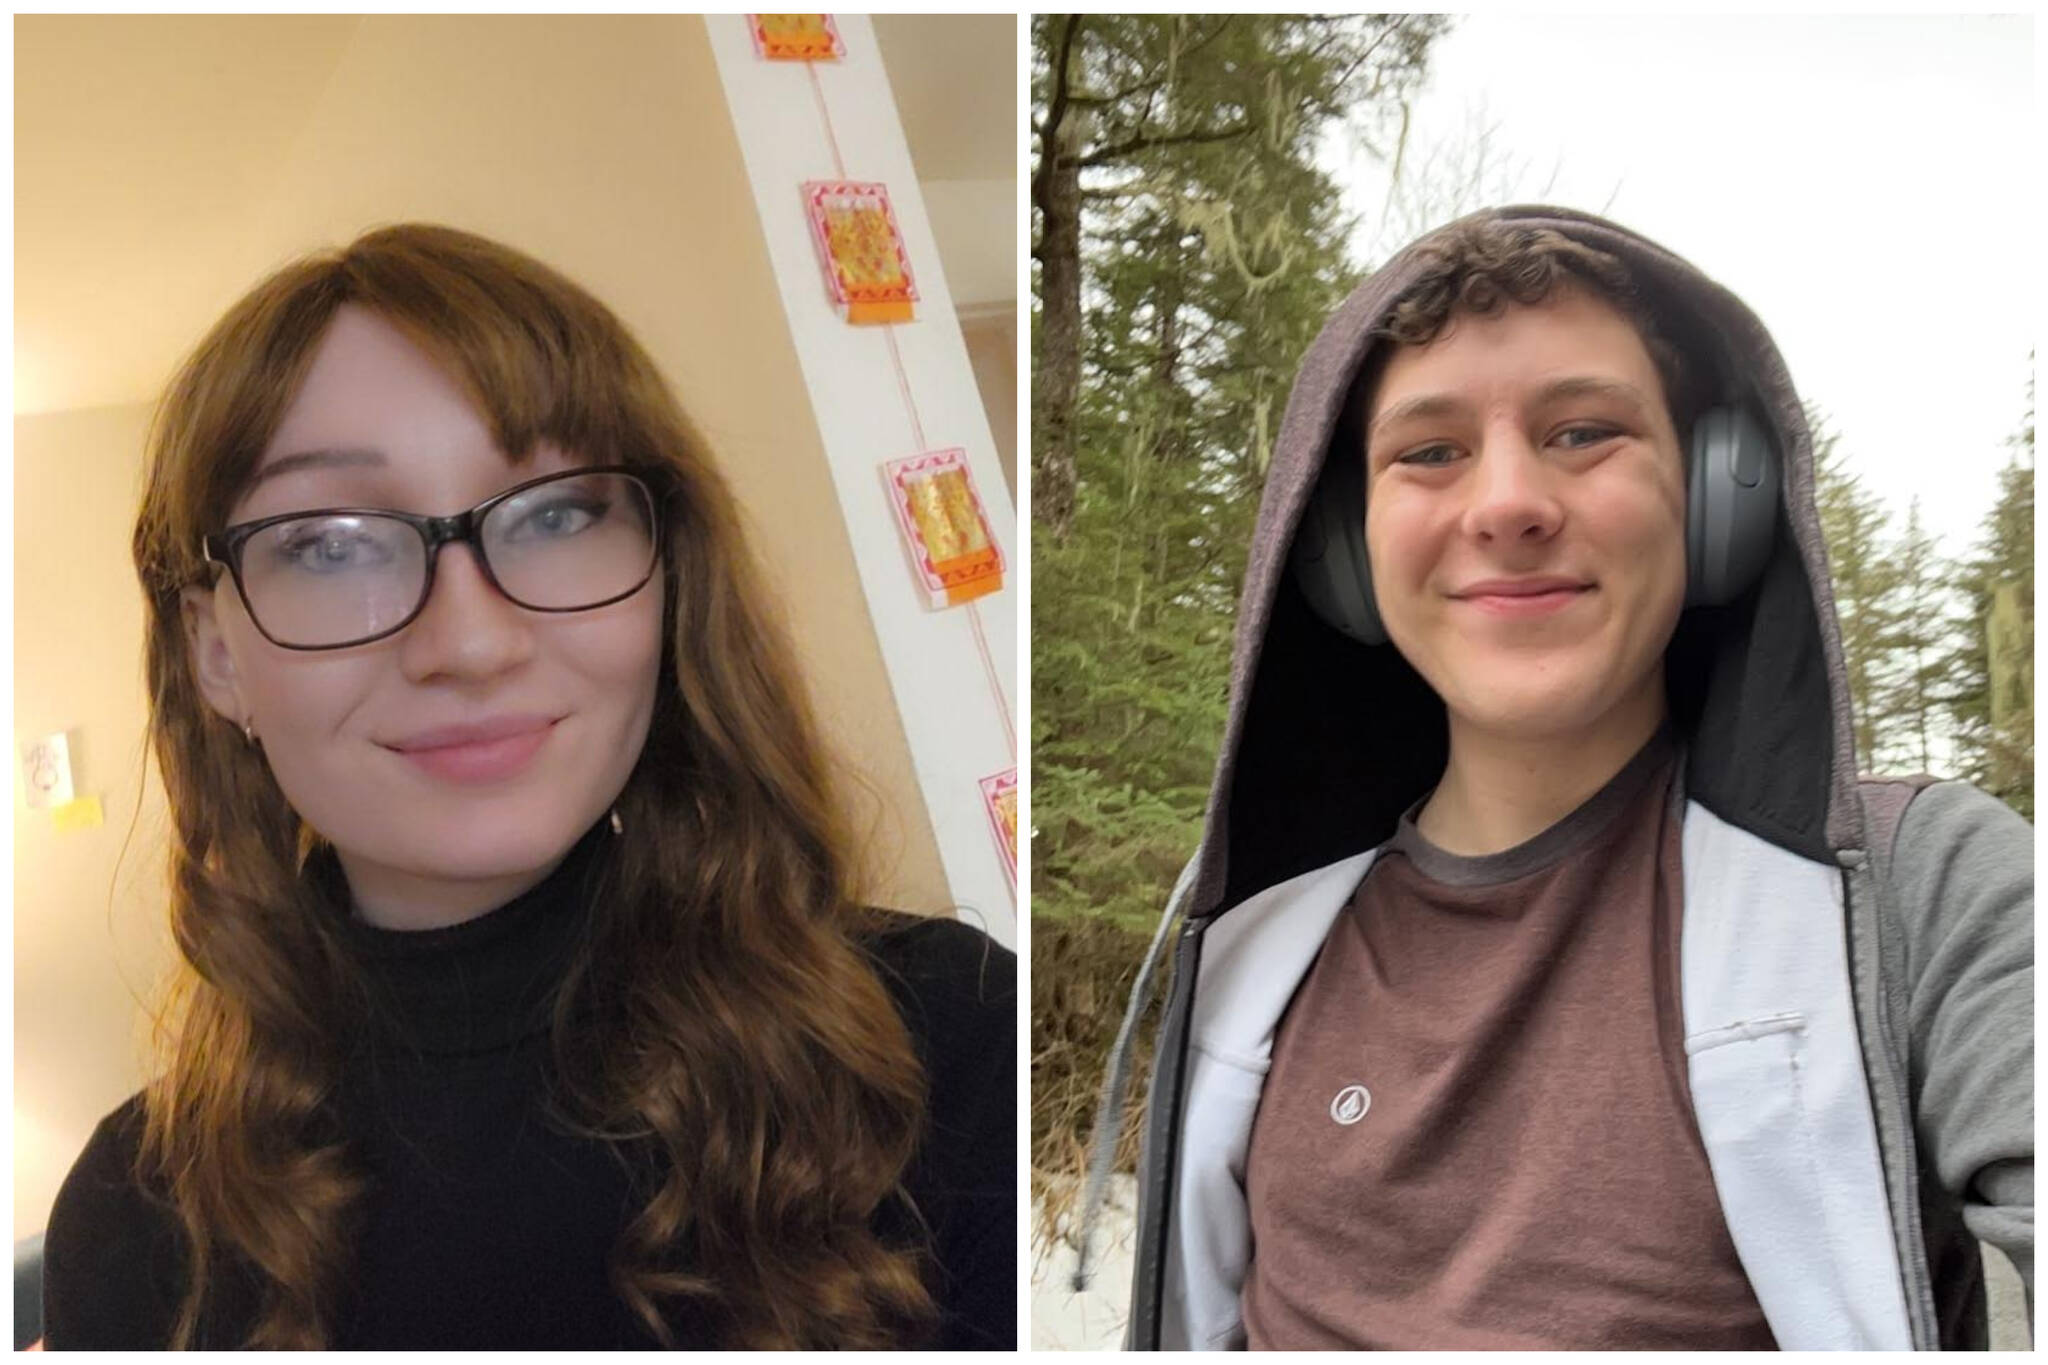 This combination photo shows University of Alaska Southeast senior Stephanie Harasim and UAS freshman A.J. Schultz tied for first place in the spring history writing contest sponsored by the Gastineau Channel Historical Society. (Courtesy Photos)